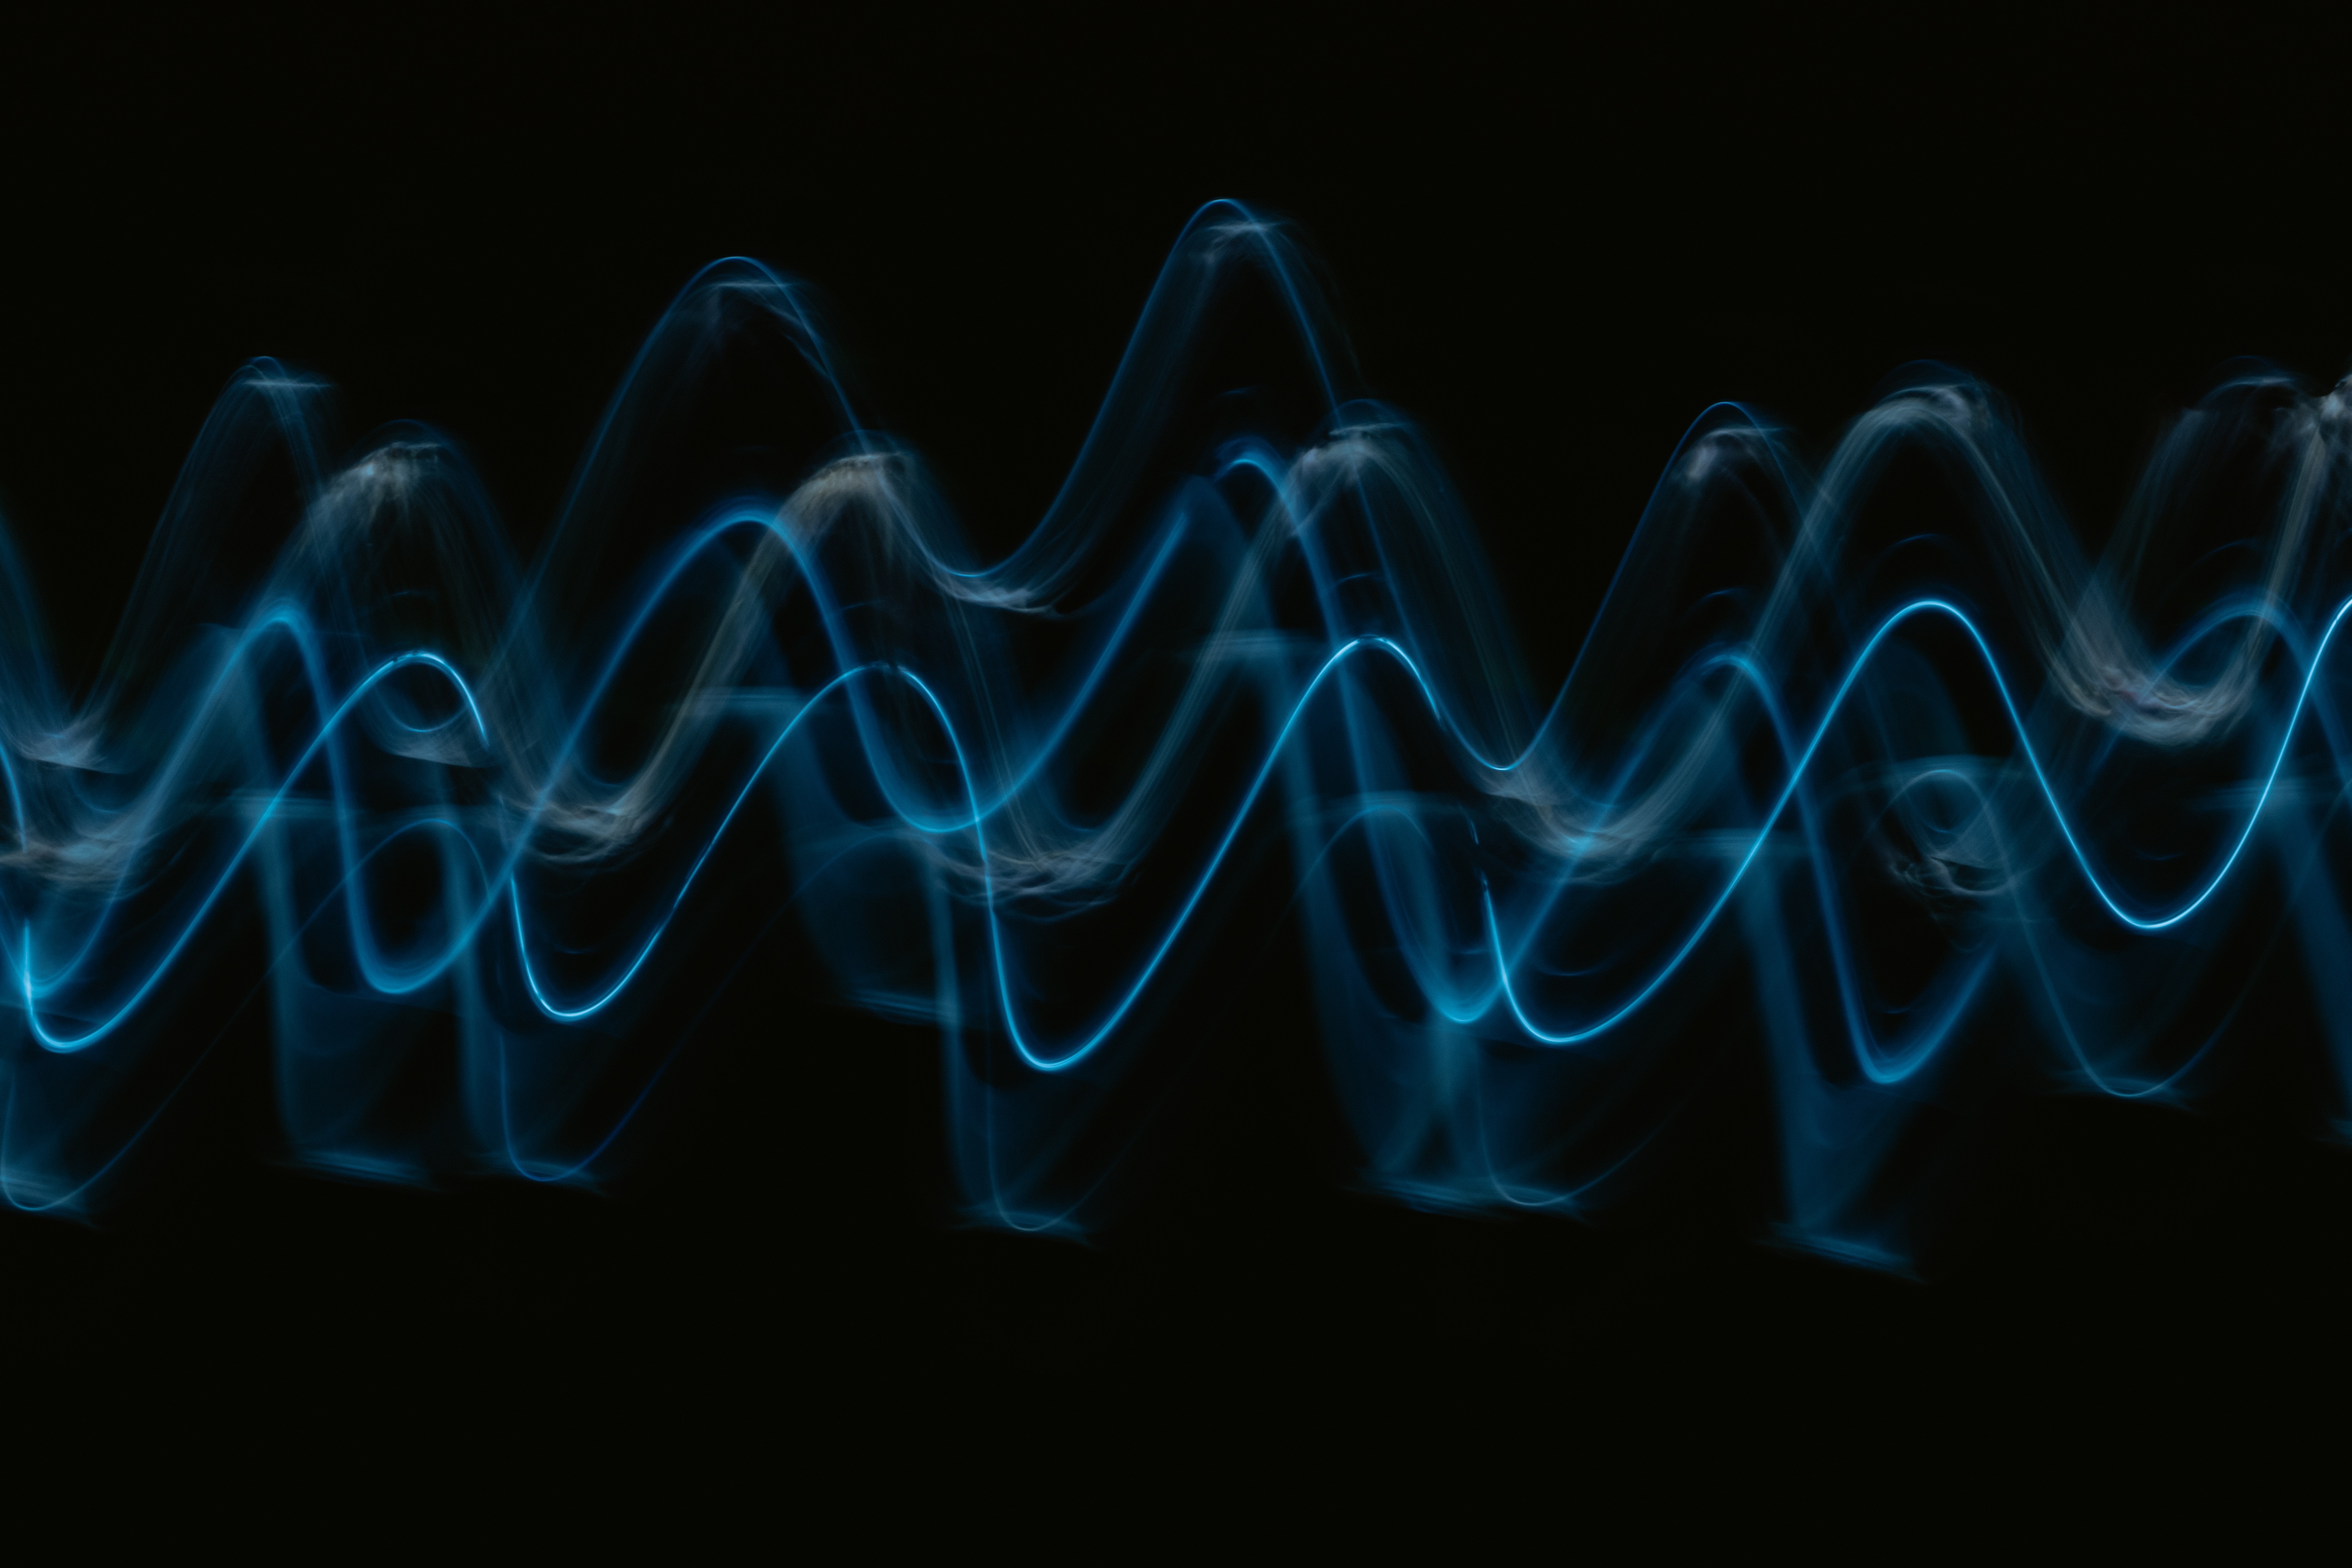 An abstract image of blue sine waves on a black background